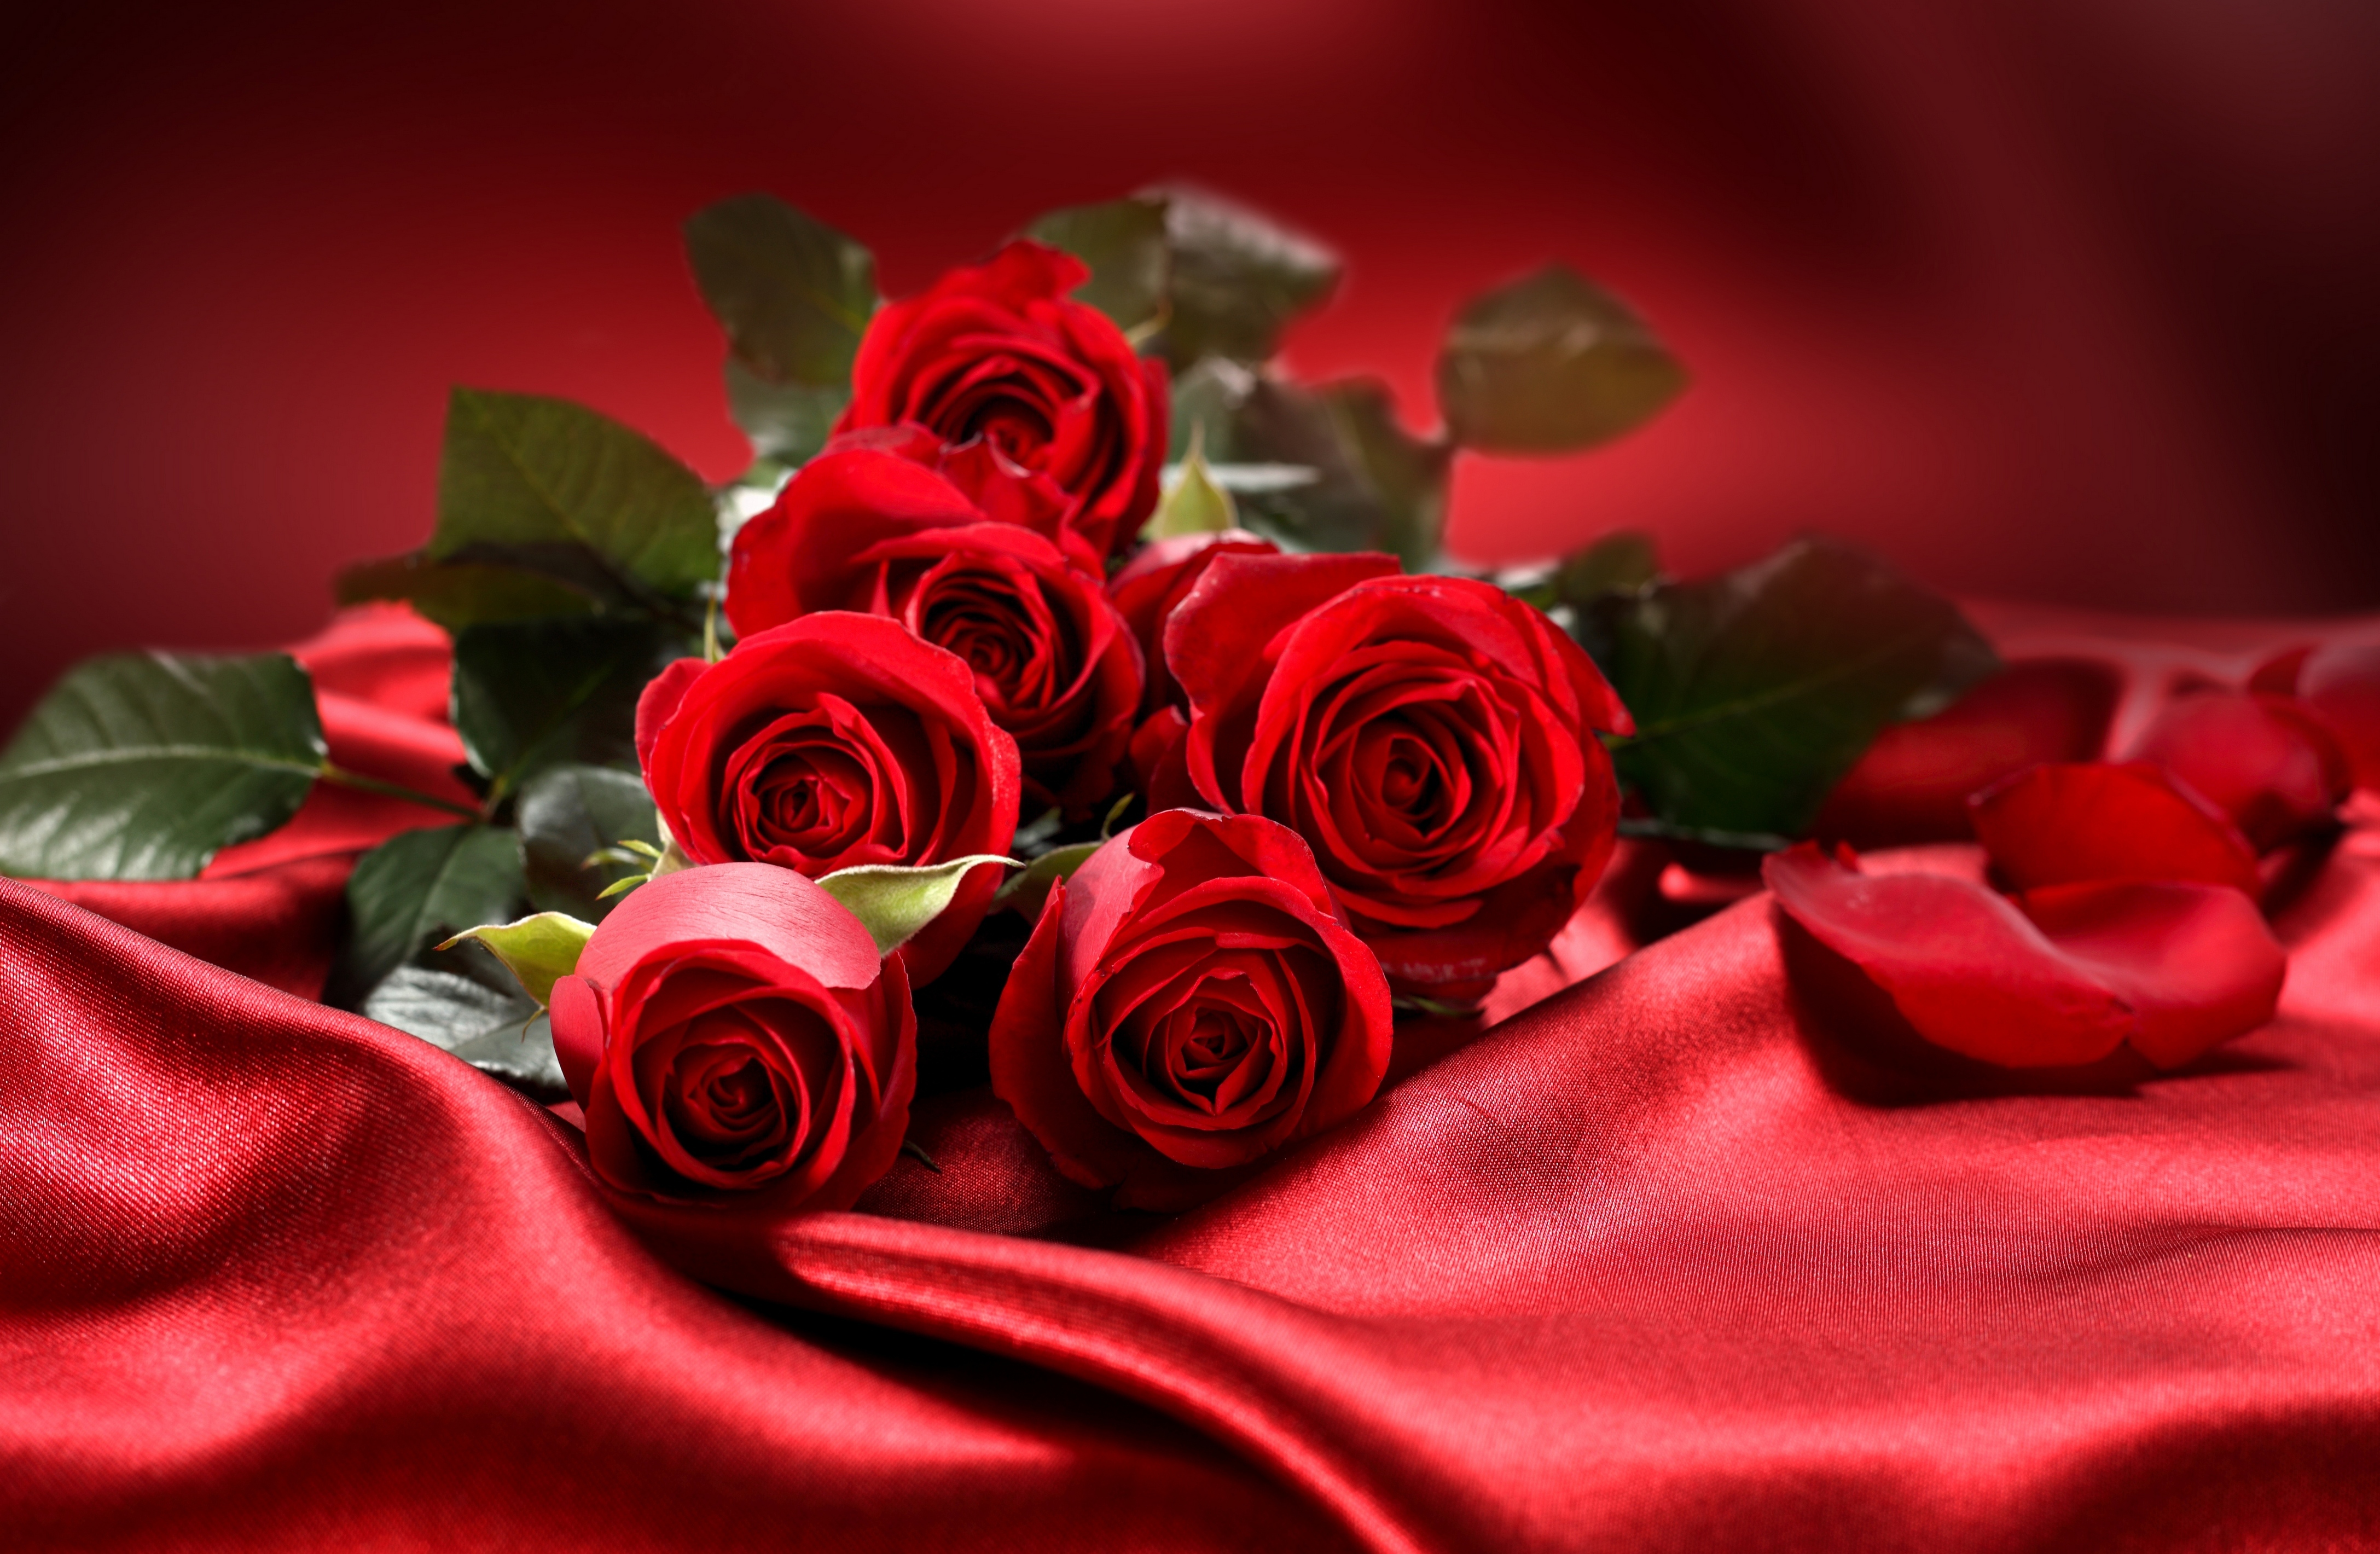 Free Download Valentines Day Flowers Wallpapers 4350x2840 For Your Desktop Mobile Tablet Explore 48 Valentine Flowers Wallpaper Heart Flower Wallpaper Valentine Roses Wallpaper